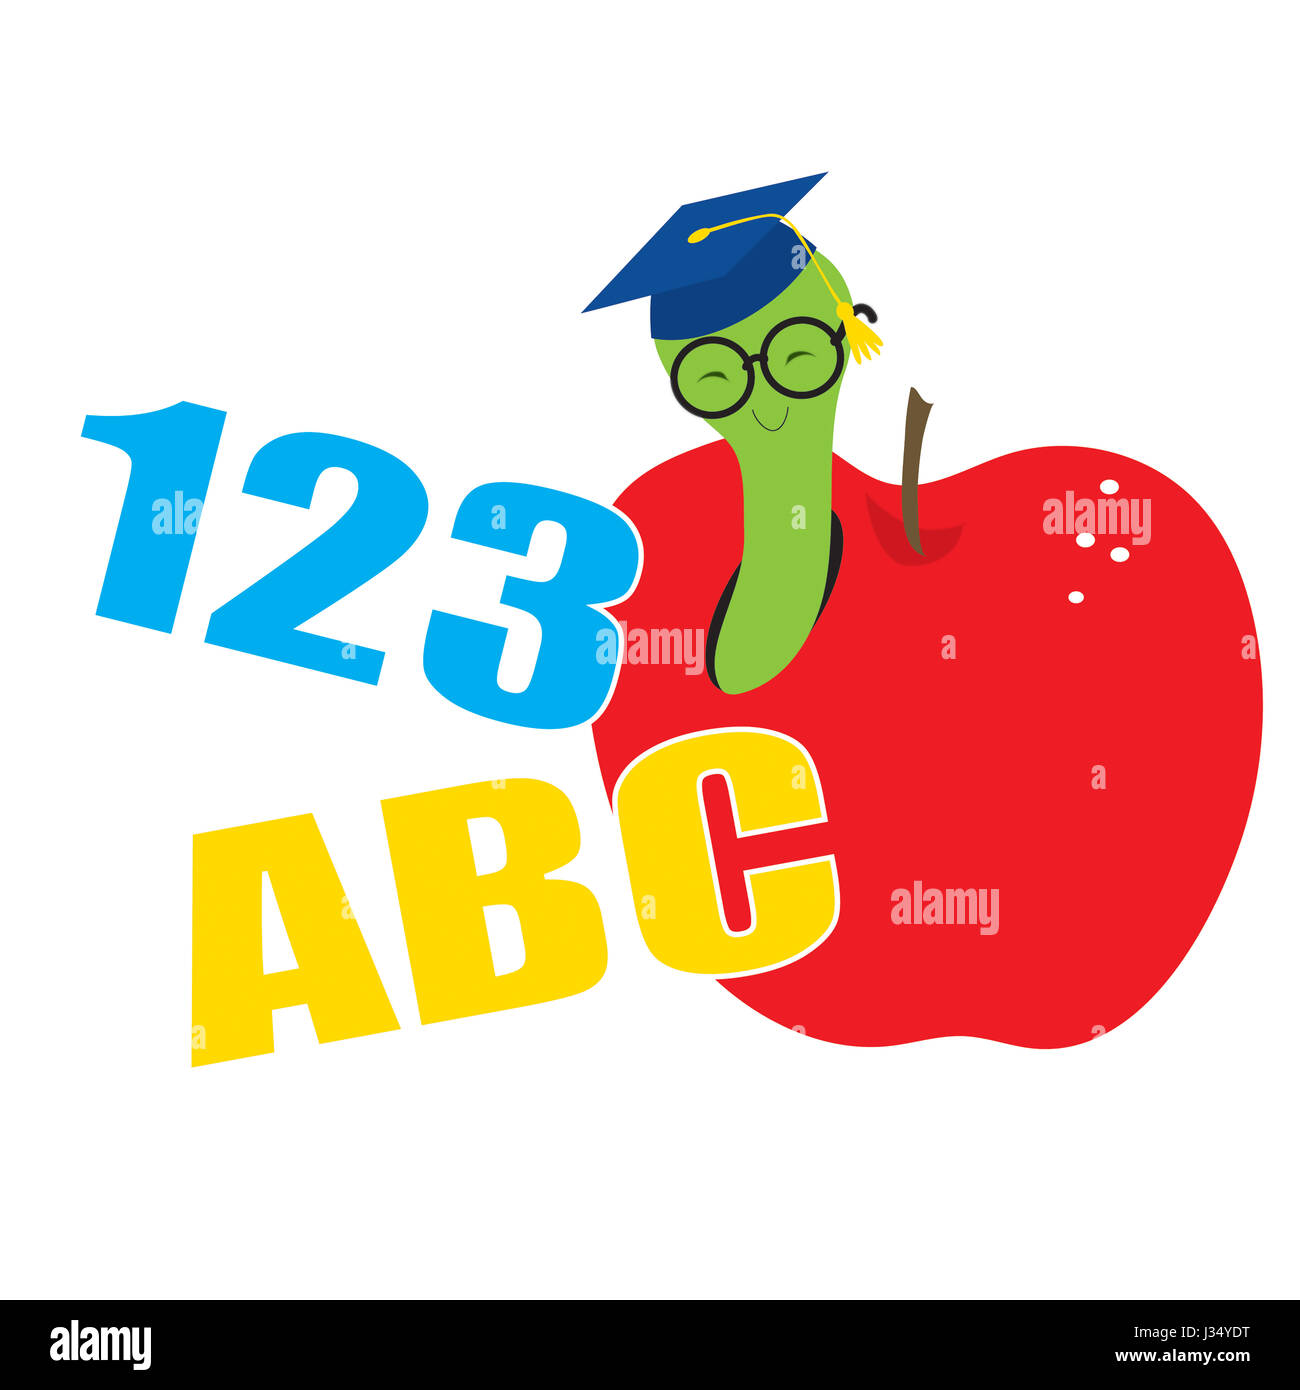 A worm wearing a mortar board and glasses is peeking out of an apple  Numbers and letters are included in the design Stock Photo